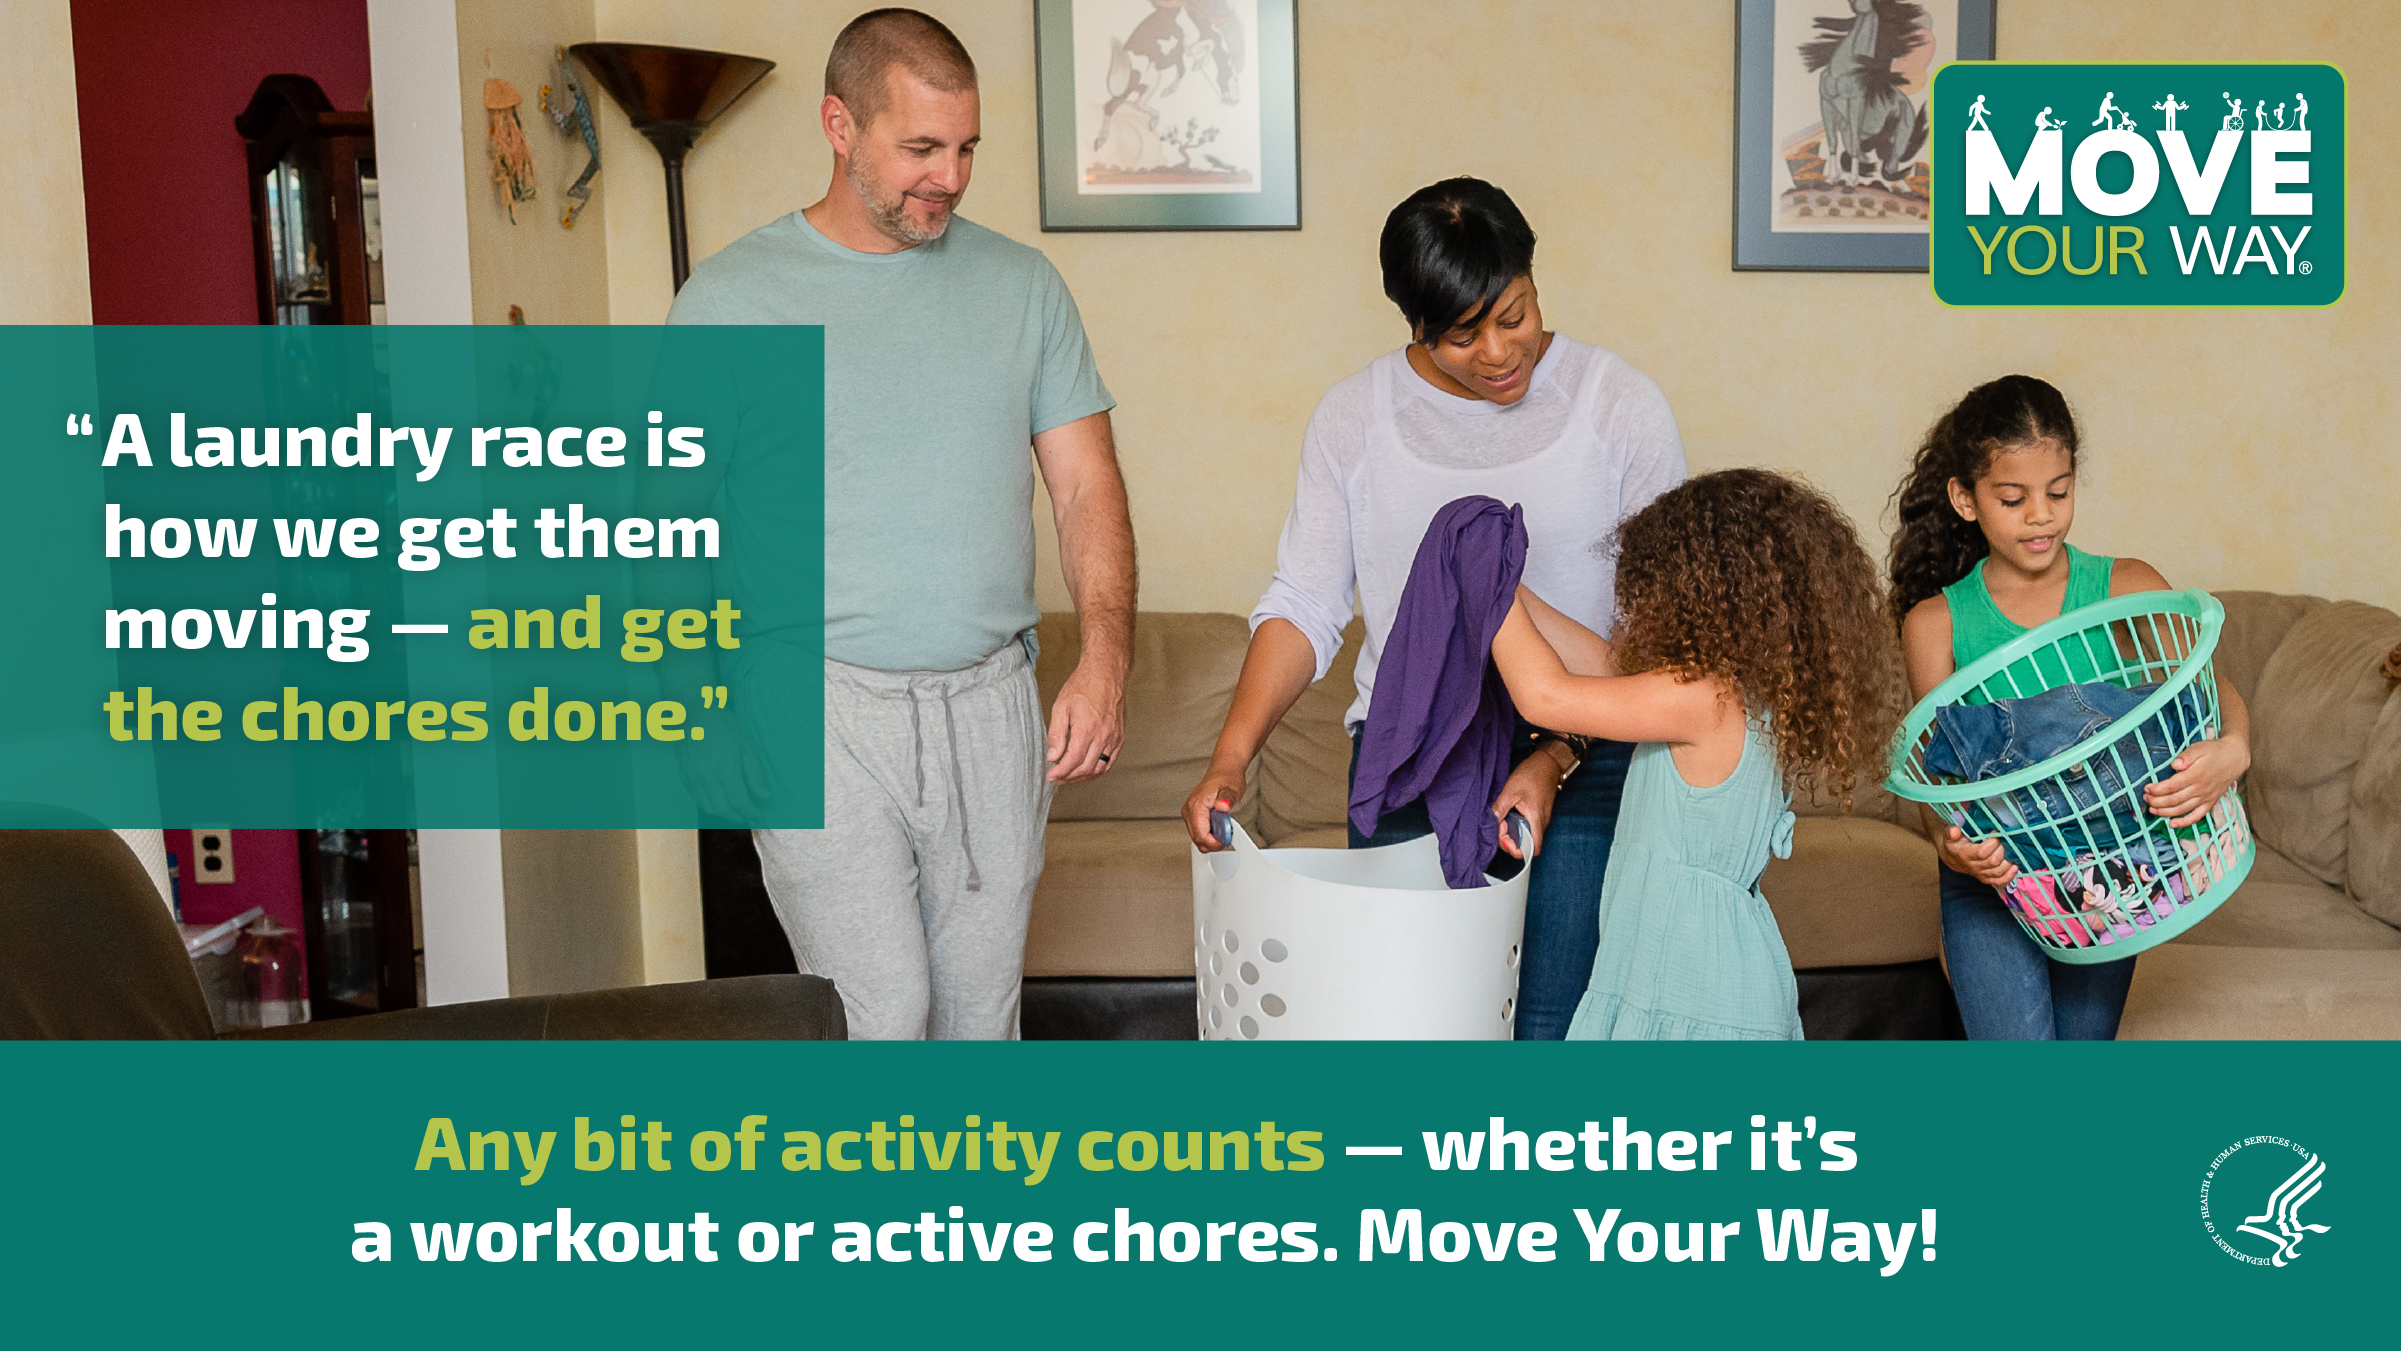 A Black mother, white father, and 2 young girls are in their living room together. The girls are gathering clothes and putting them into baskets. The image also shows the Move Your Way logo and the following messages: "A laundry race is how we get them moving — and get the chores done." and "Any bit of activity counts — whether it’s a workout or active chores. Move Your Way!"